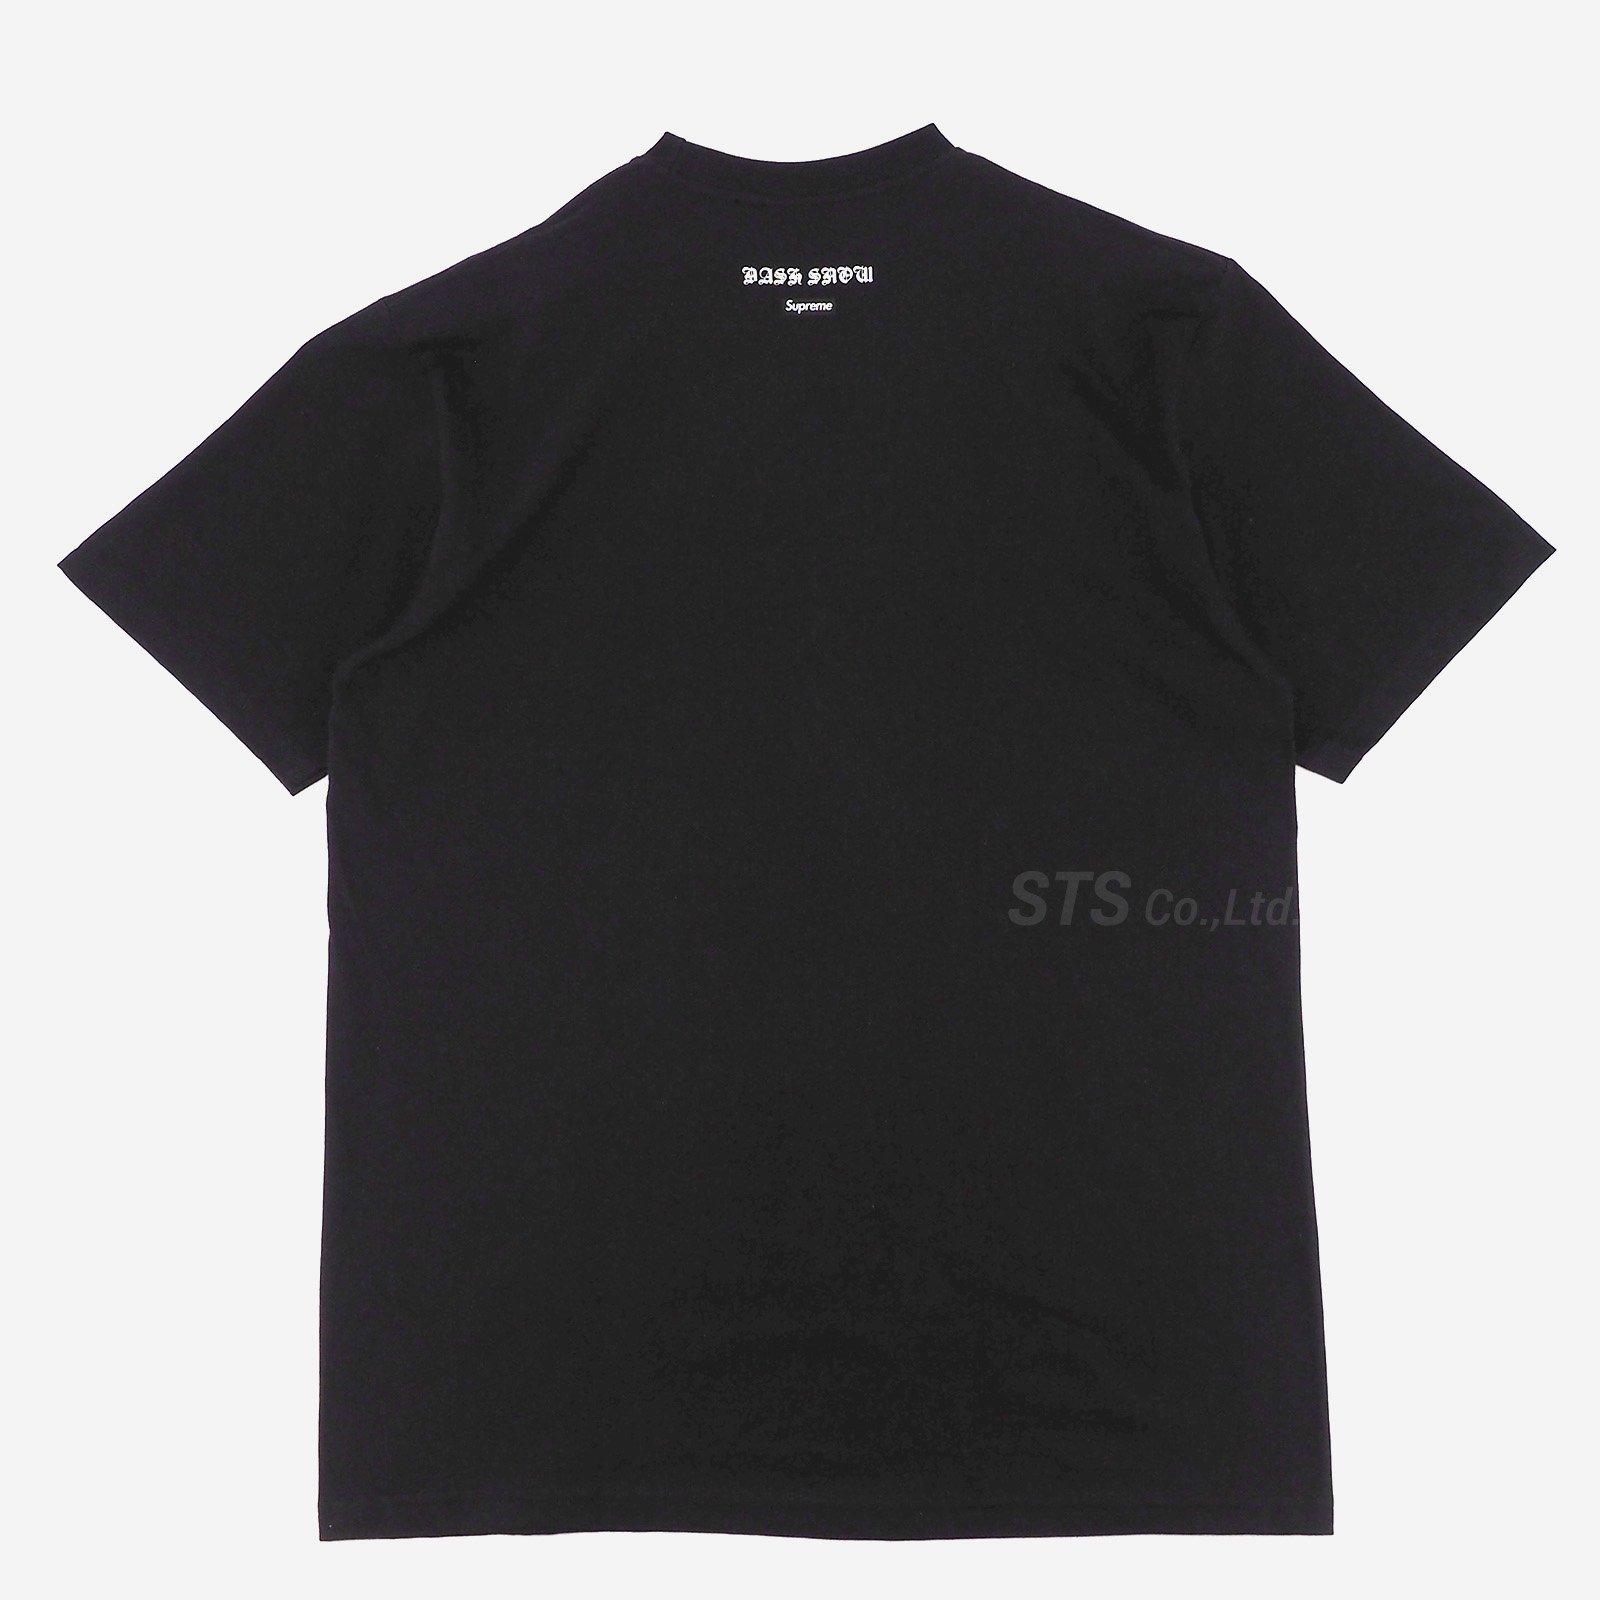 Hell Tee | SUPREME x Dash Snow | 2023 Fall/Winter - ParkSIDER